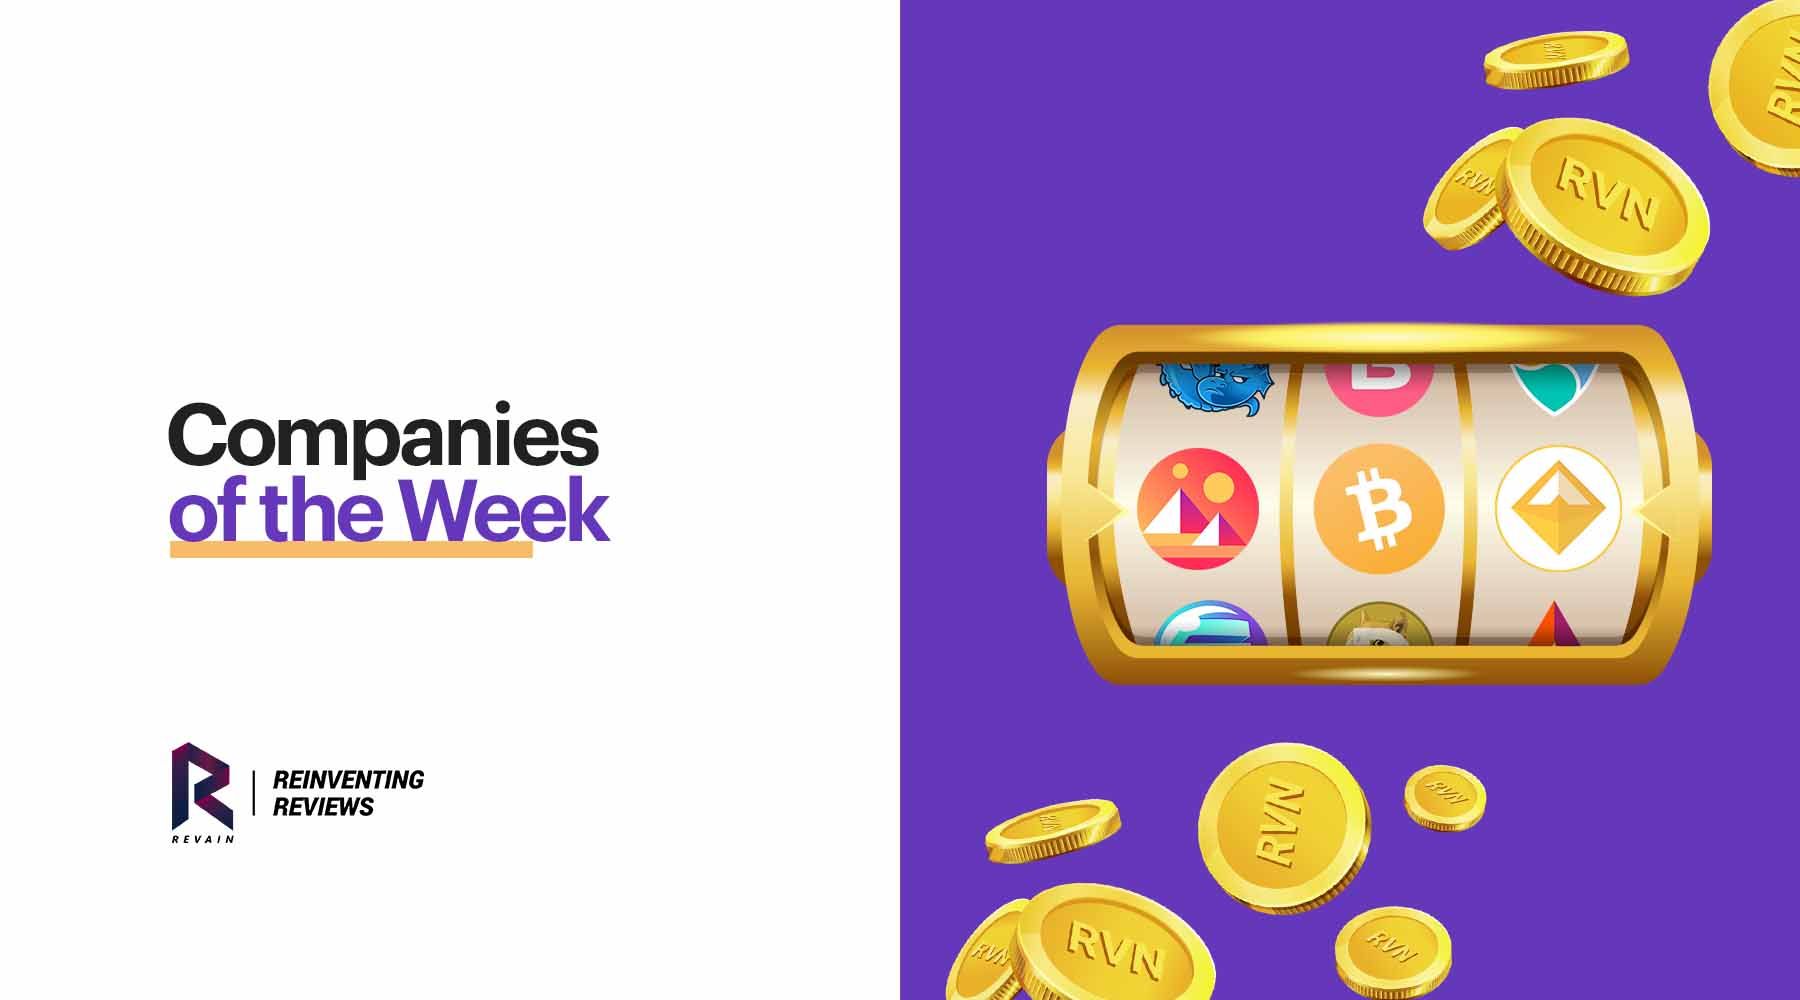 Article 'Companies of the week' on Revain